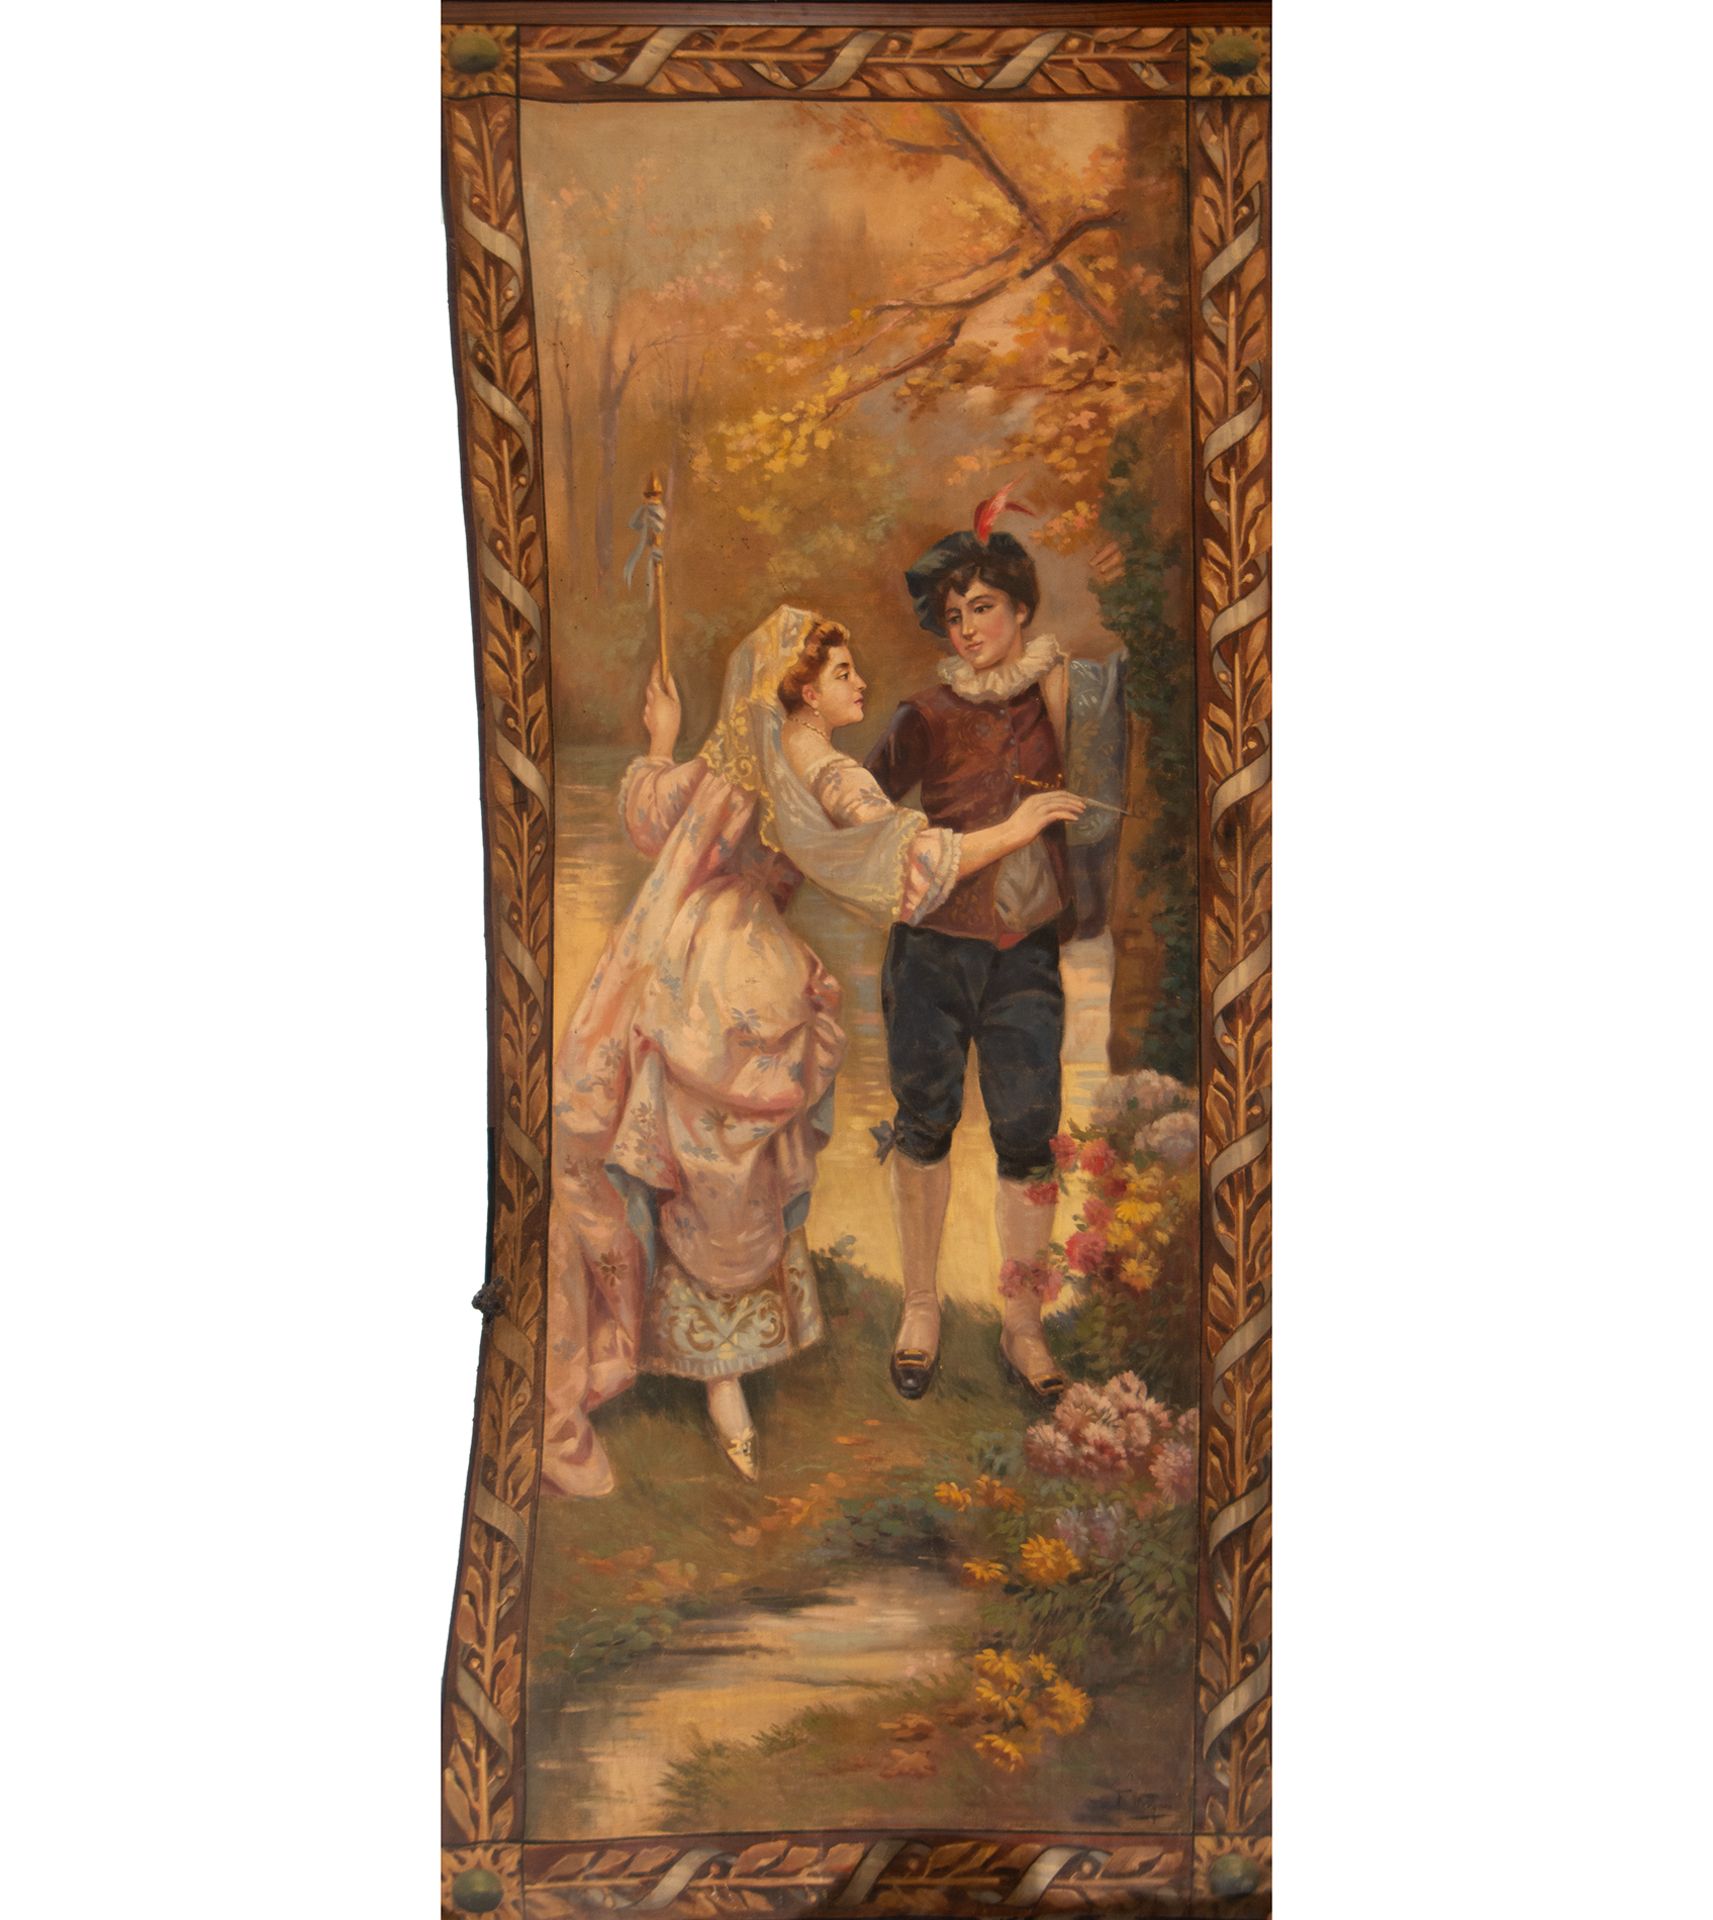 Couple of Lovers, Spanish school from the beginning of the 20th century